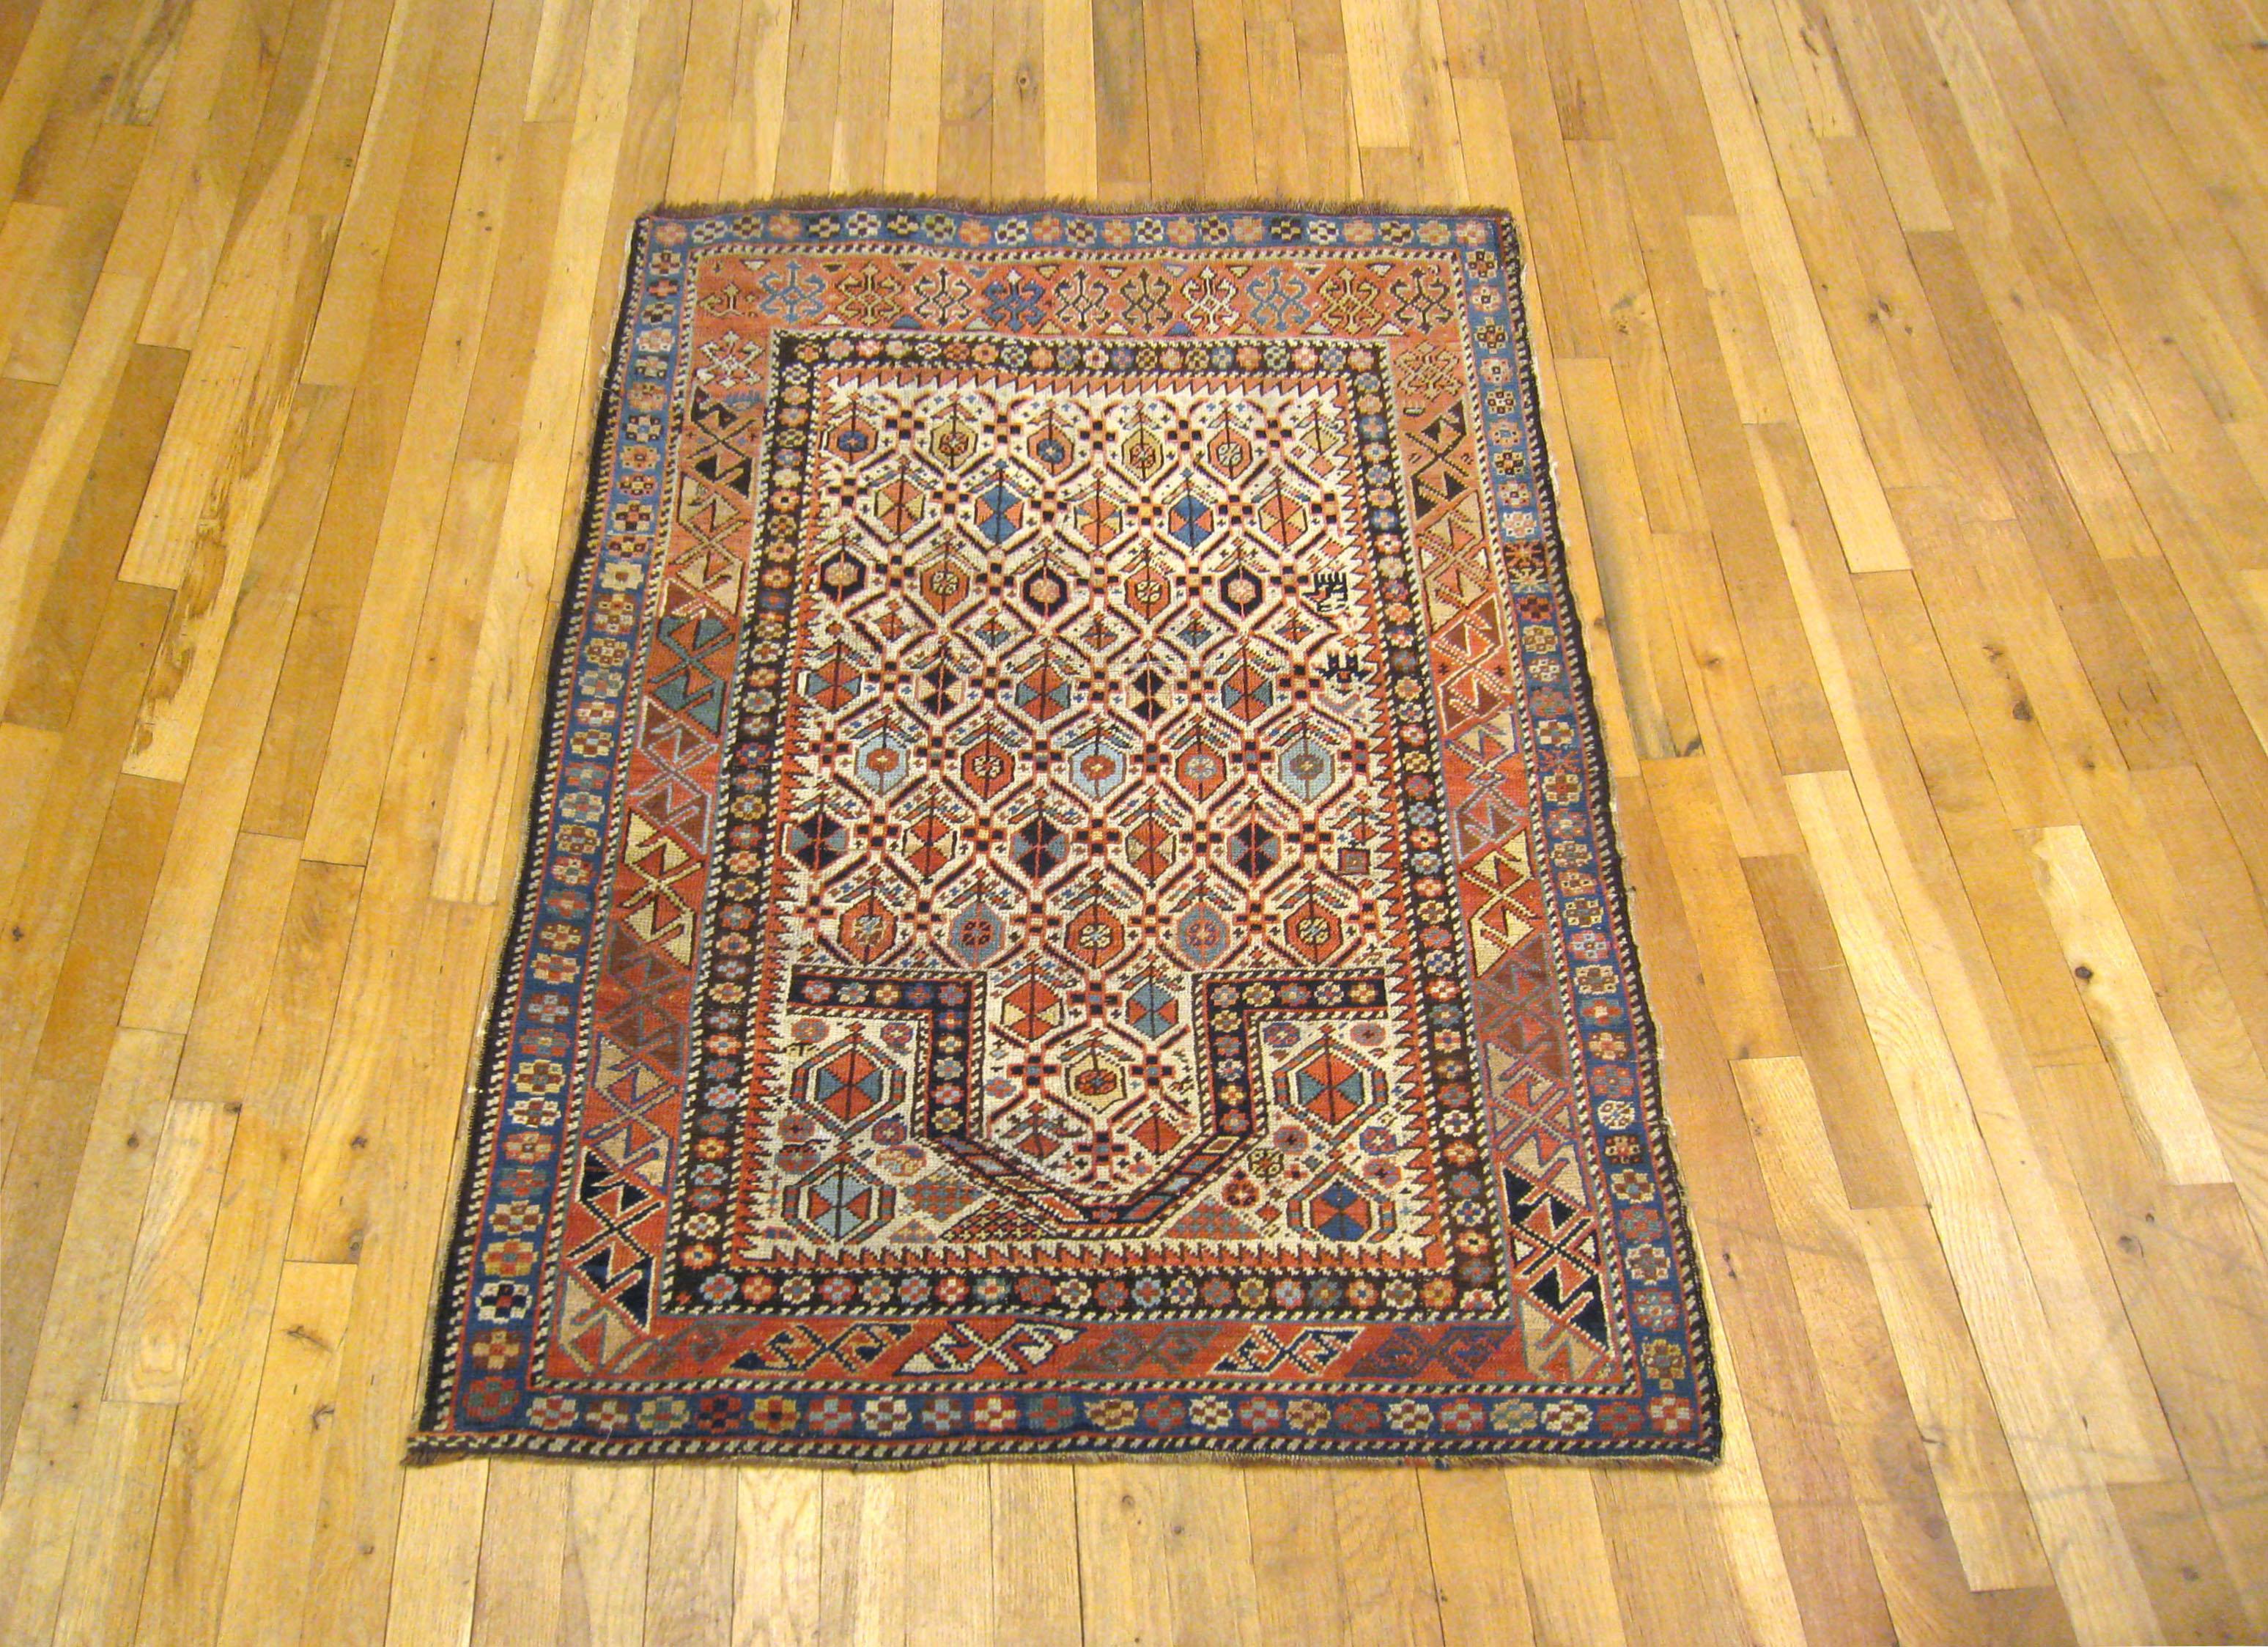 An antique Caucasian Kuba meditation rug, size 4.6 x 3.1, circa 1890. This fine hand-knotted wool oriental rug features a repeating lozenge design on a seldom found ivory field, with a prayer arch at one end. The central field is enclosed within a